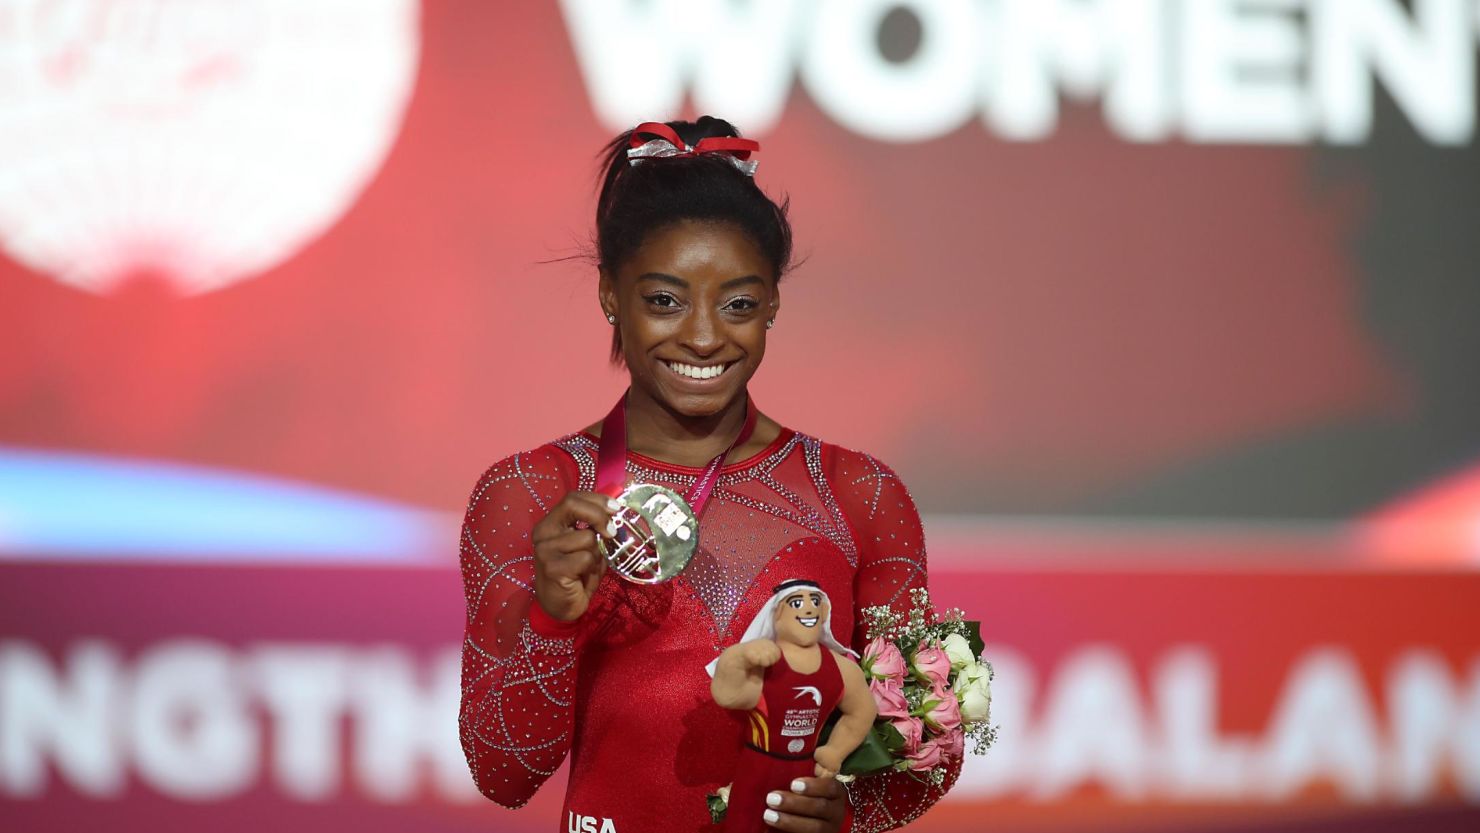 Simone Biles with her medal after the Floor Exercise final.